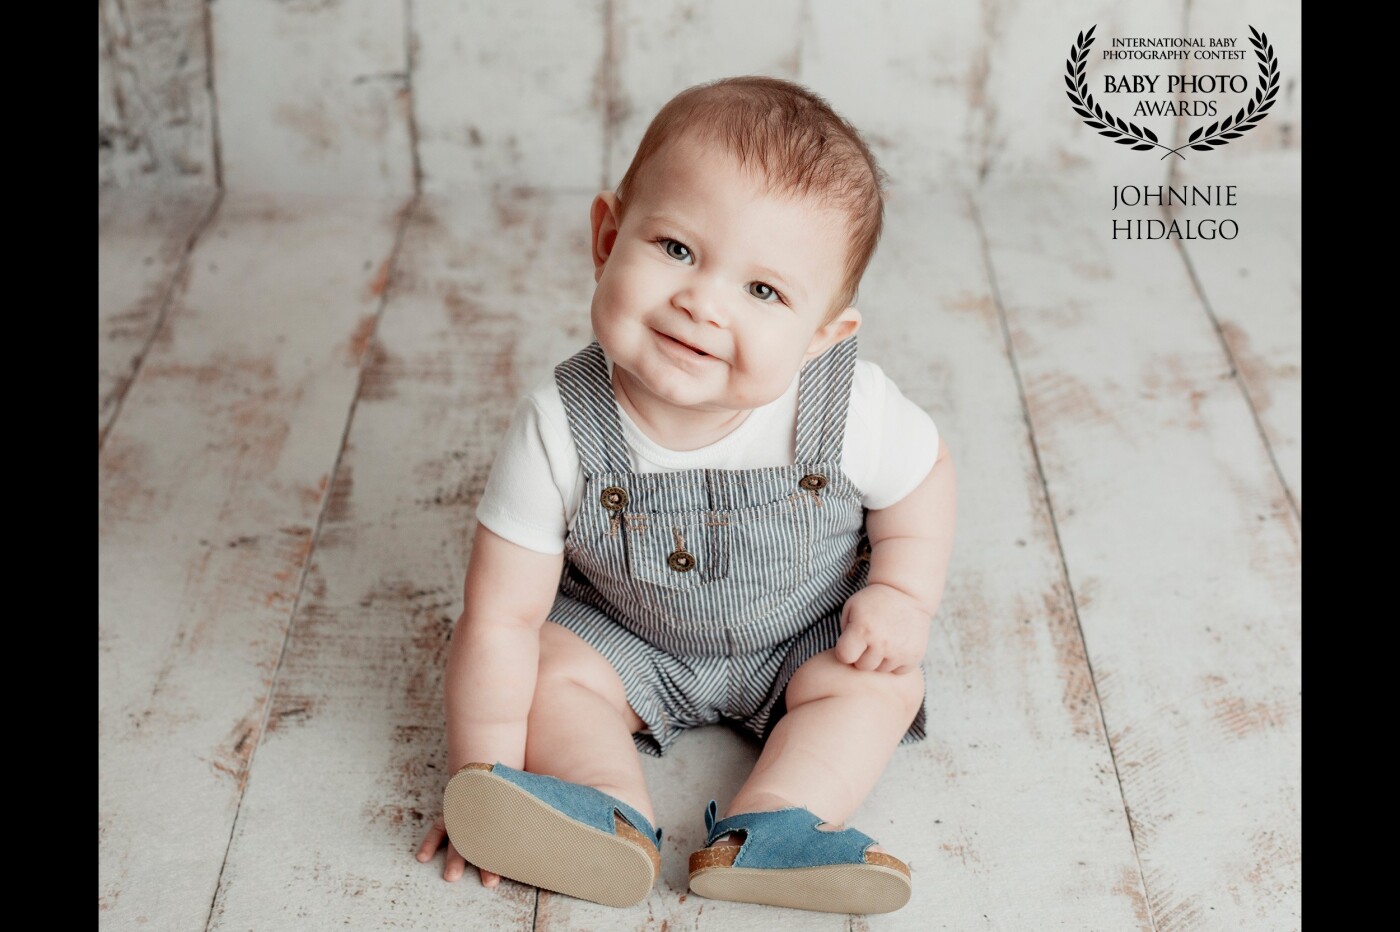 I have been photographing Cynex since he was a newborn baby.  It is a wonderful privilege to be able to document the early stages of his life.  He is so happy and just looks at those beautiful dreamy eyes, long eyelashes and that smile...oh it will melt your heart. 